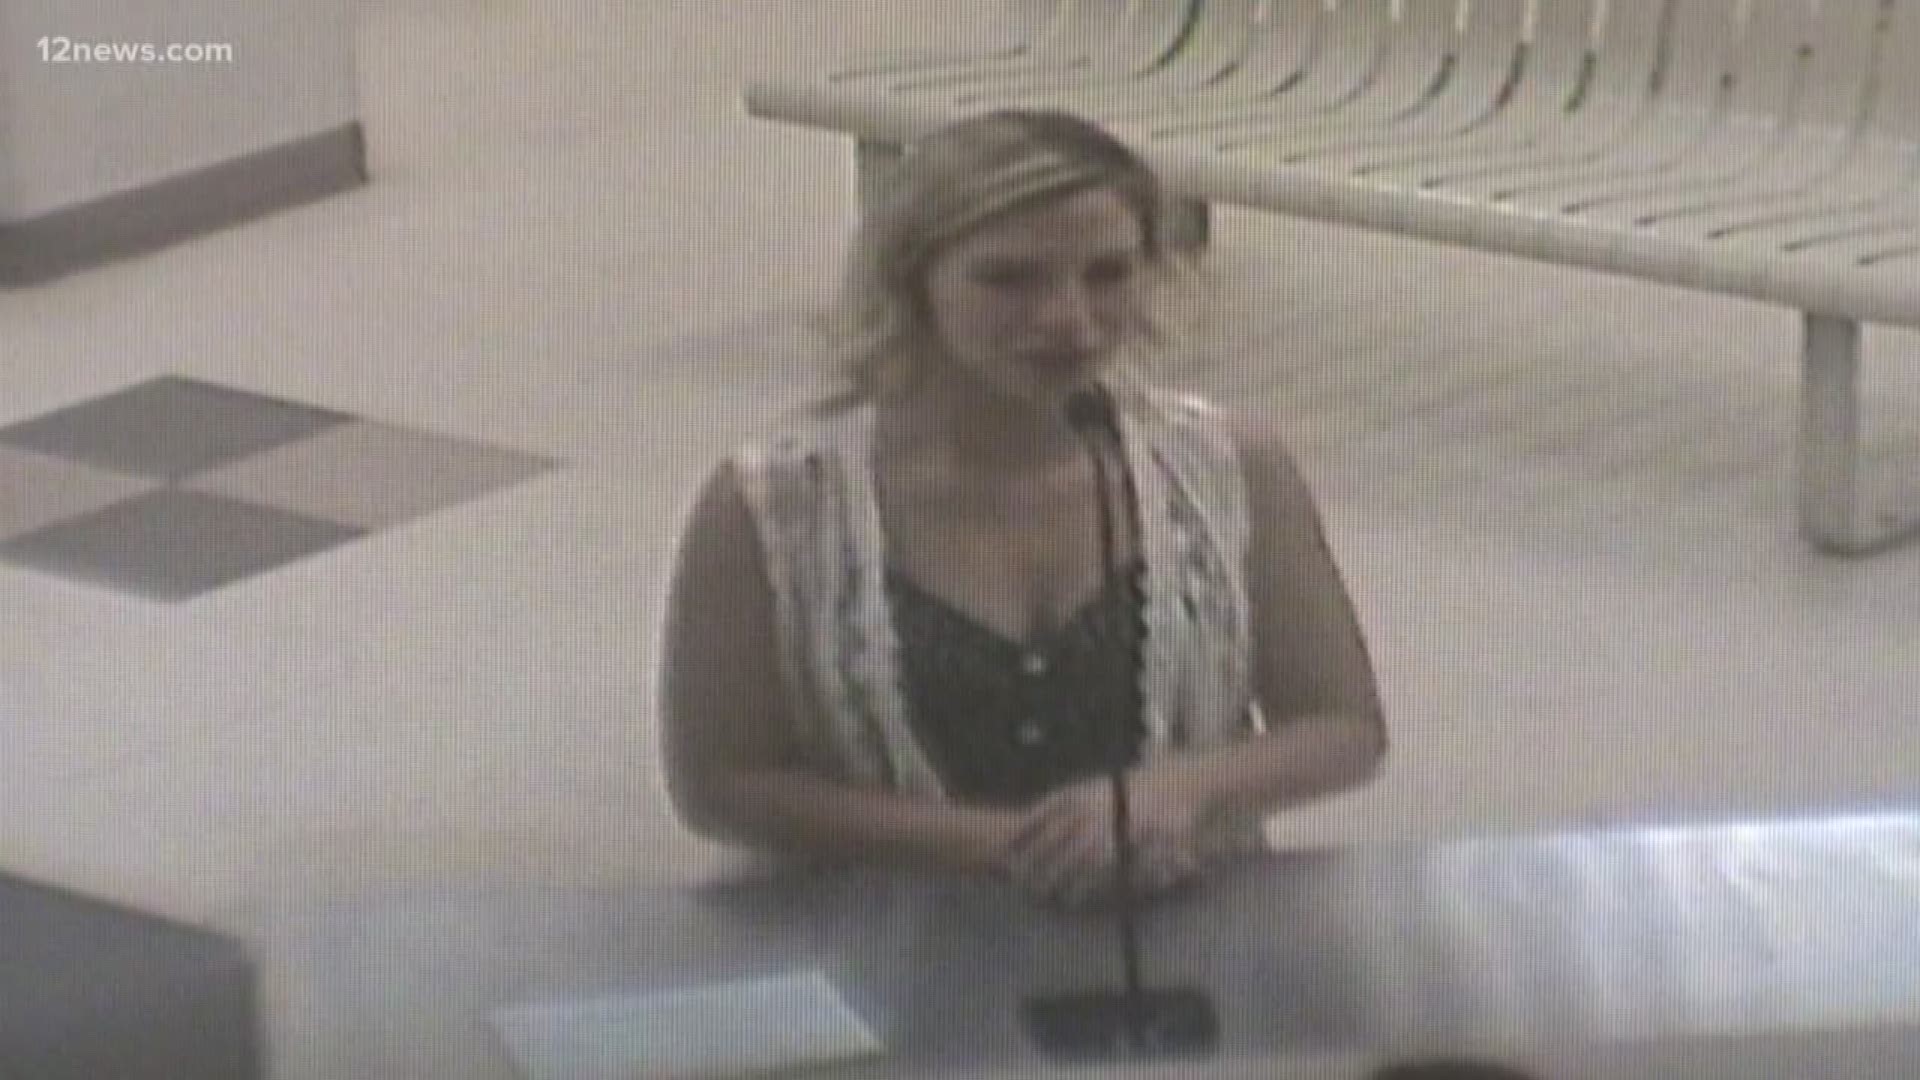 In court paperwork, the Liberty Elementary School District admits that the Las Brisas School principal first learned about the possibility of sexual abuse between teacher Brittany Zamora and a 13-year-old student a month before she was arrested. Students came forward with what the school considered to be rumors. The district also admits in court paperwork the principal did not consider what the students said to be worth immediately reporting to parents or police.